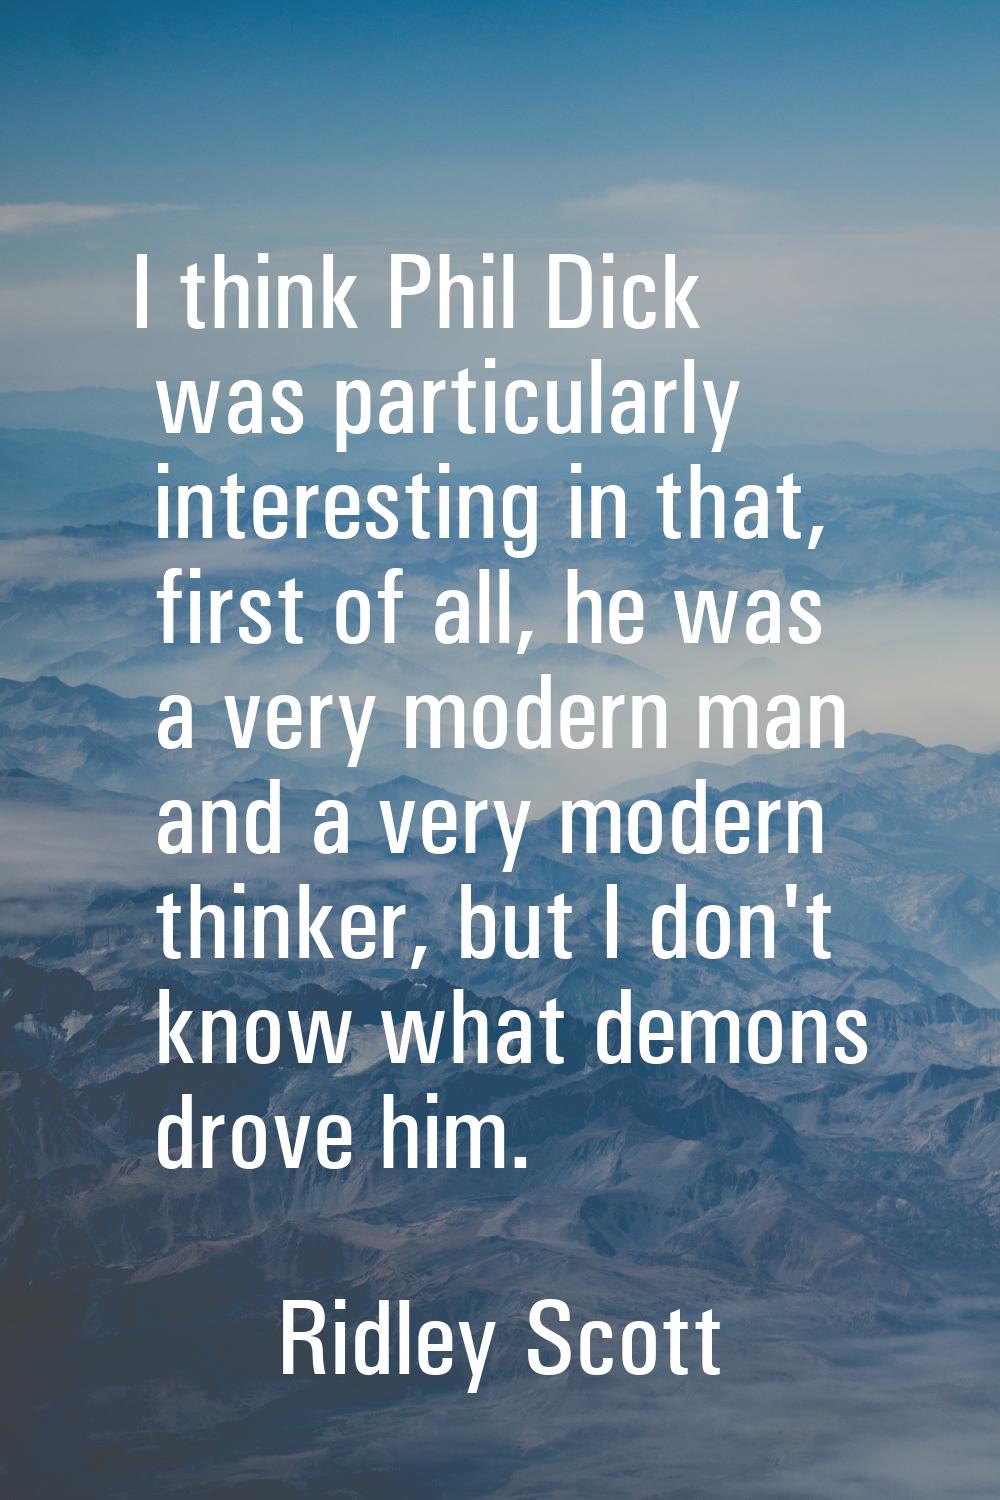 I think Phil Dick was particularly interesting in that, first of all, he was a very modern man and 